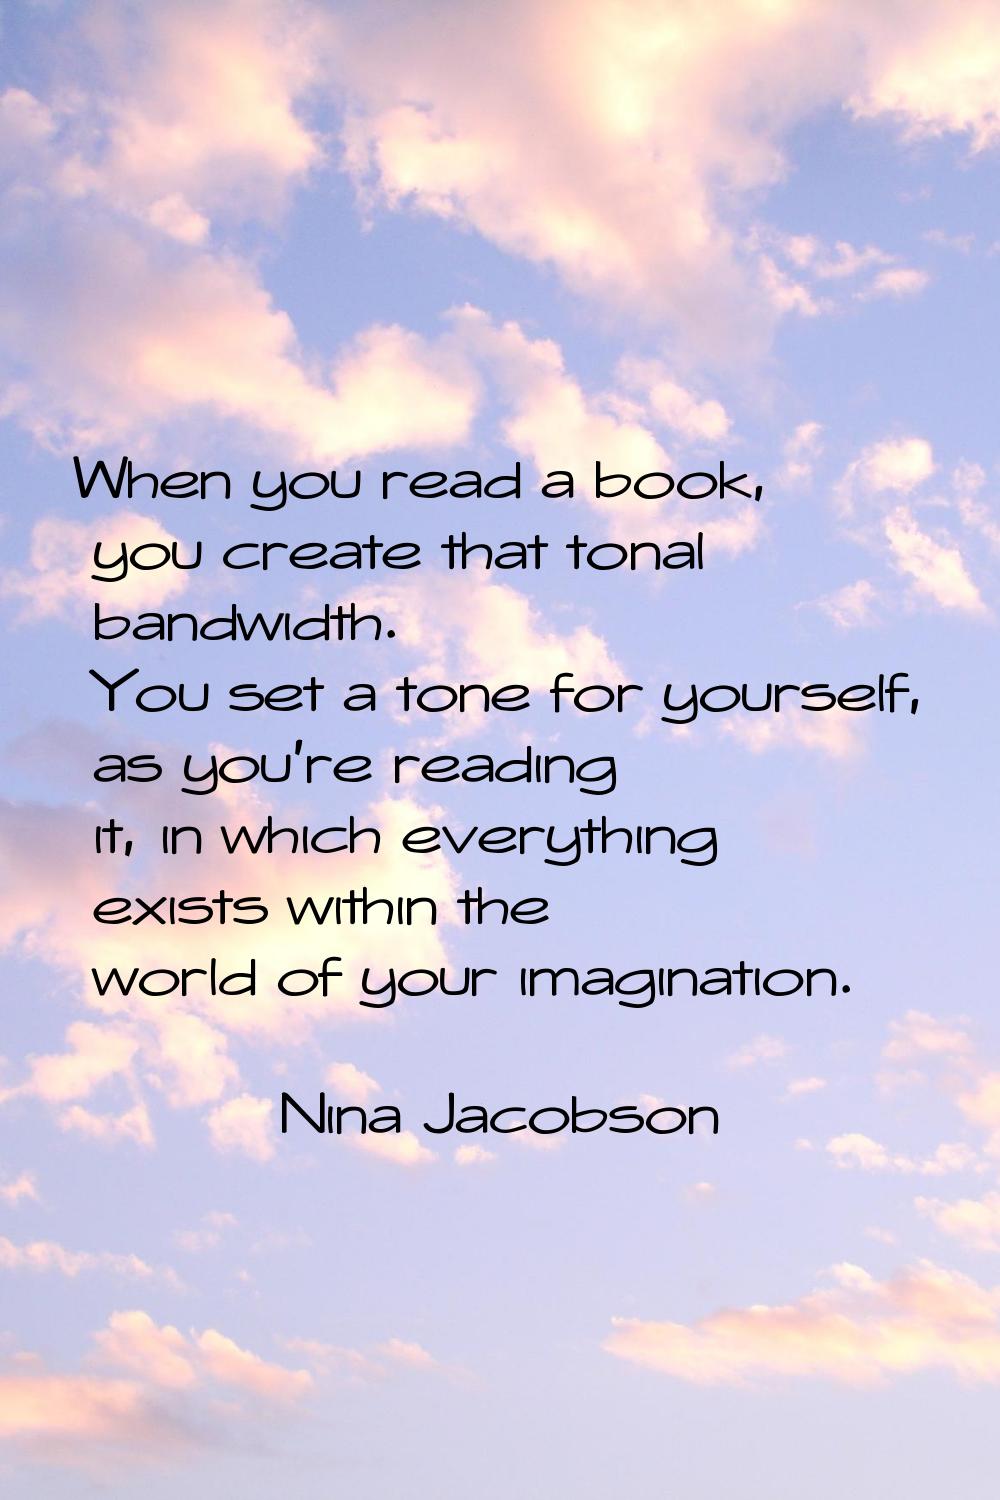 When you read a book, you create that tonal bandwidth. You set a tone for yourself, as you're readi